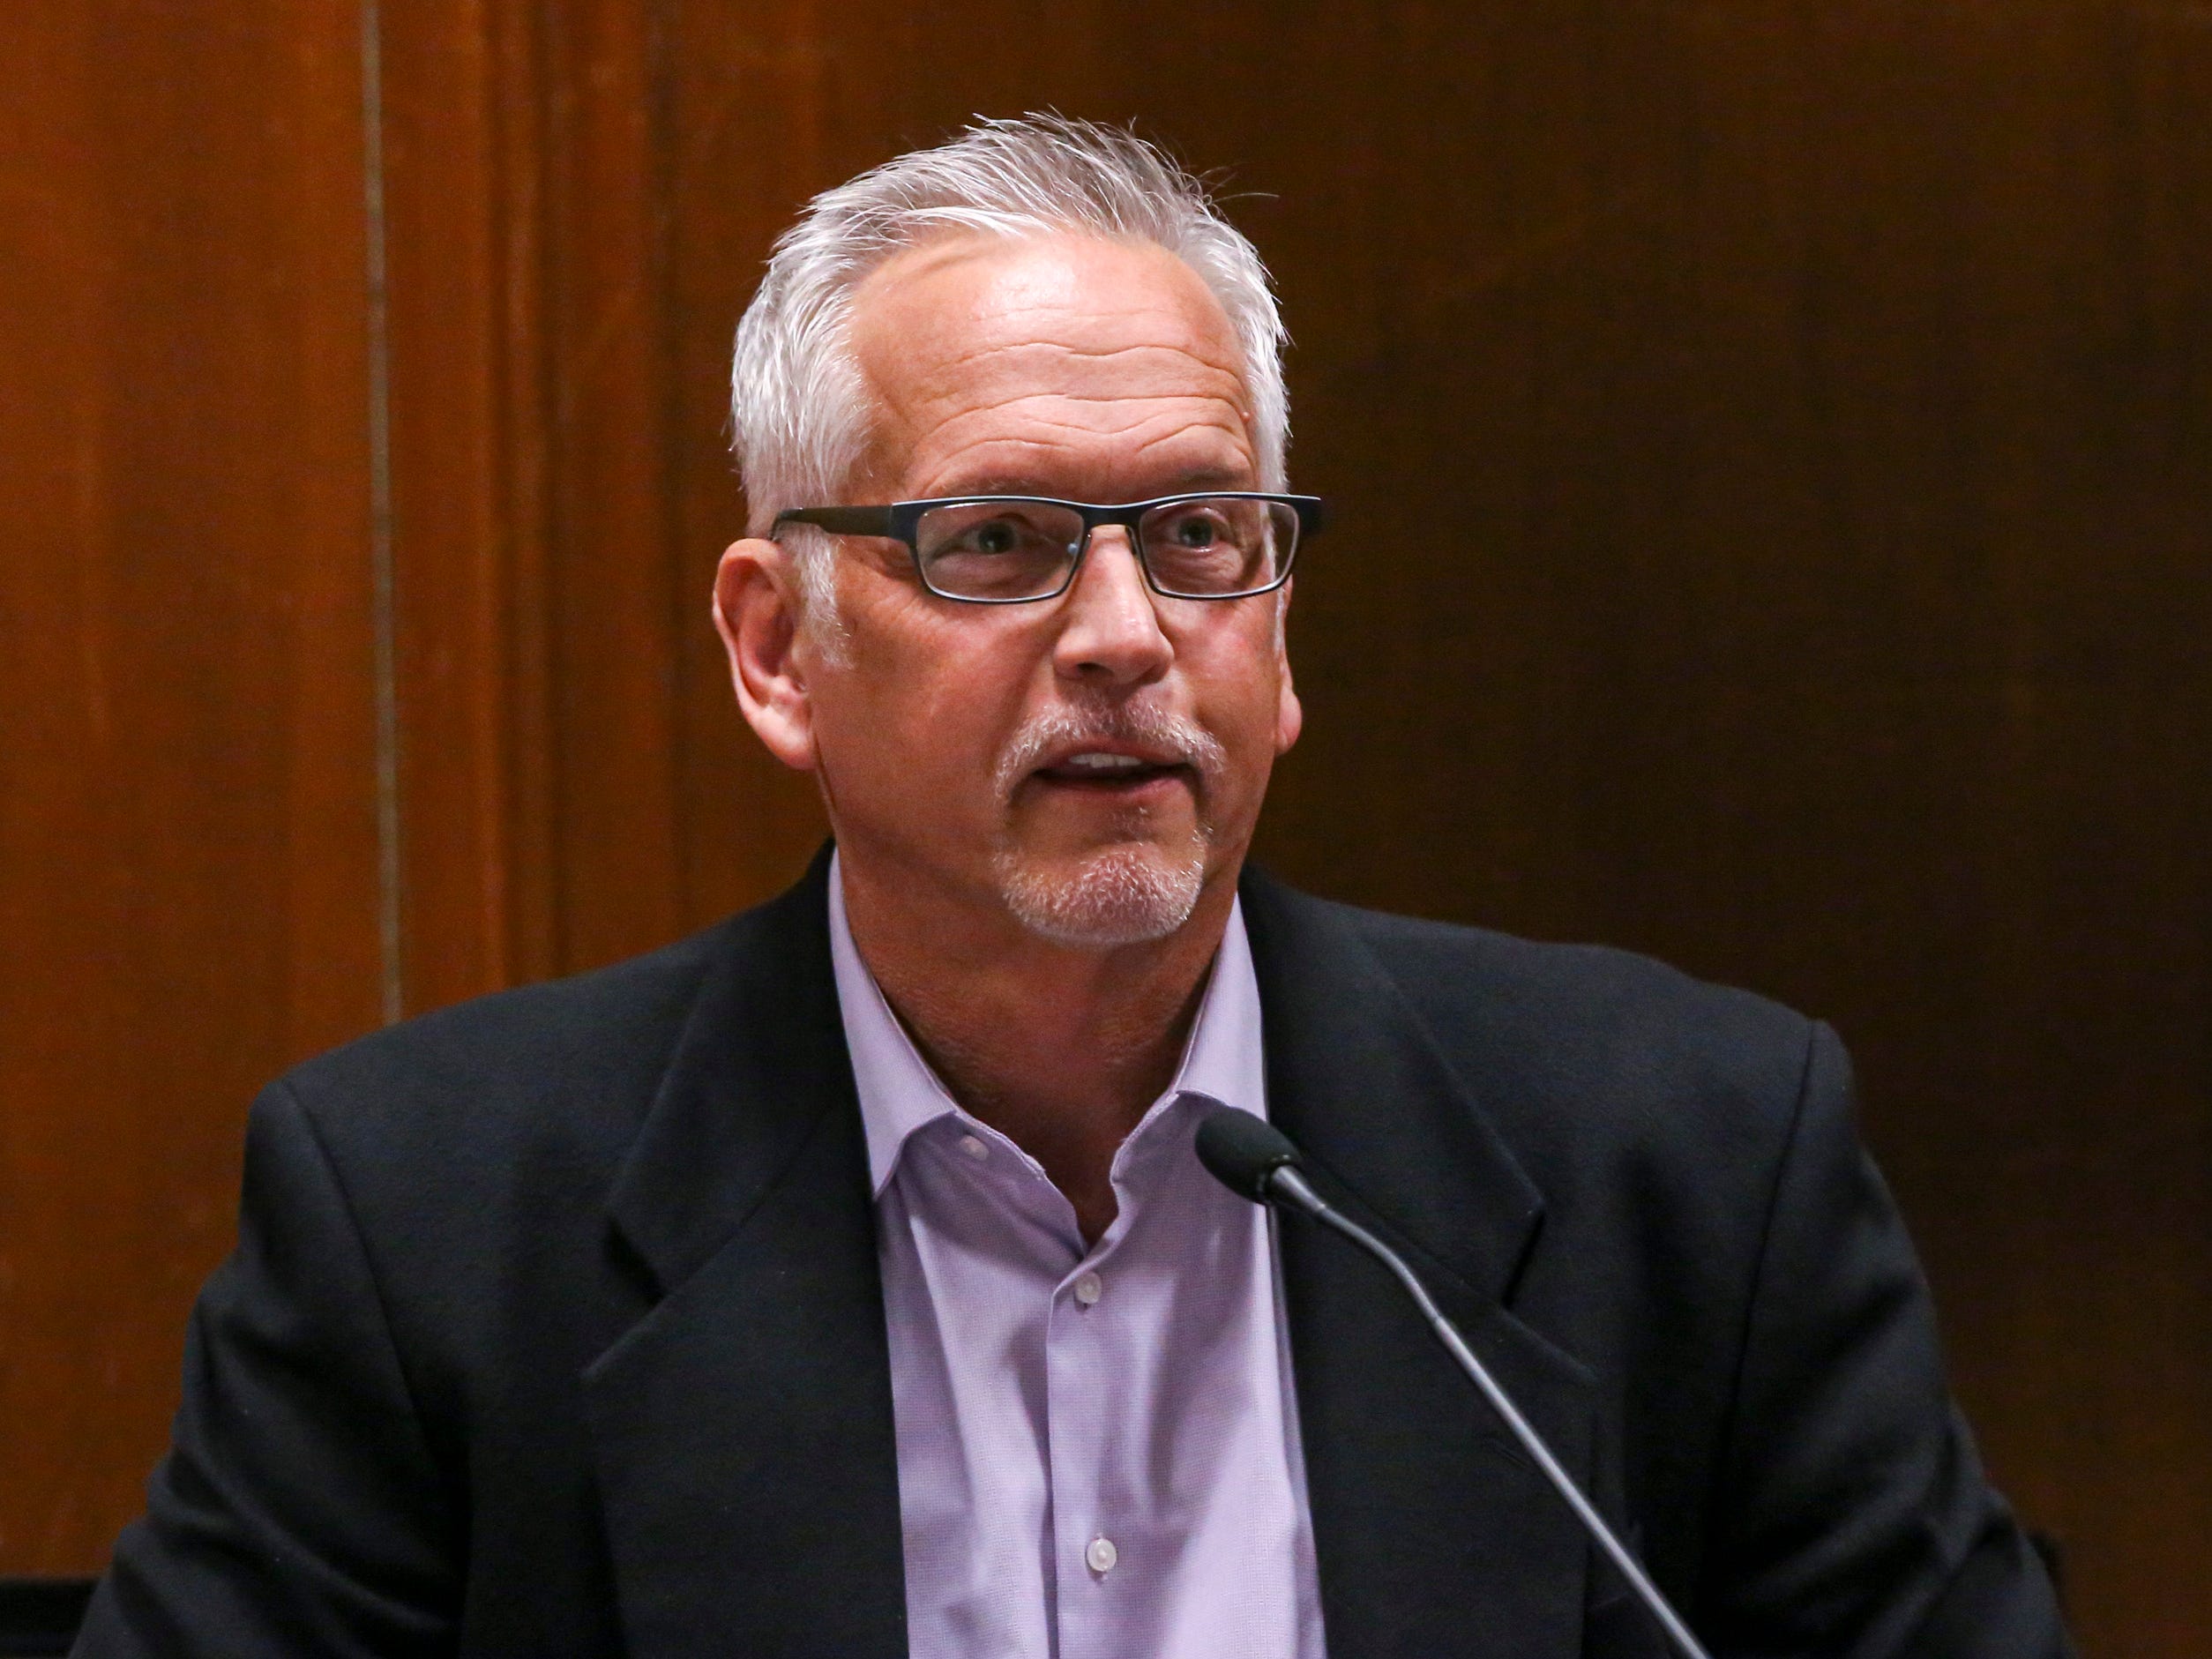 Jeffrey White, of Toddville, testifies during Jerry Burns' trial at the Scott County Courthouse in Davenport on Wednesday, Feb. 12, 2020. White attended Kennedy High School with Michelle Martinko, and was at the choir banquet the evening she was killed.